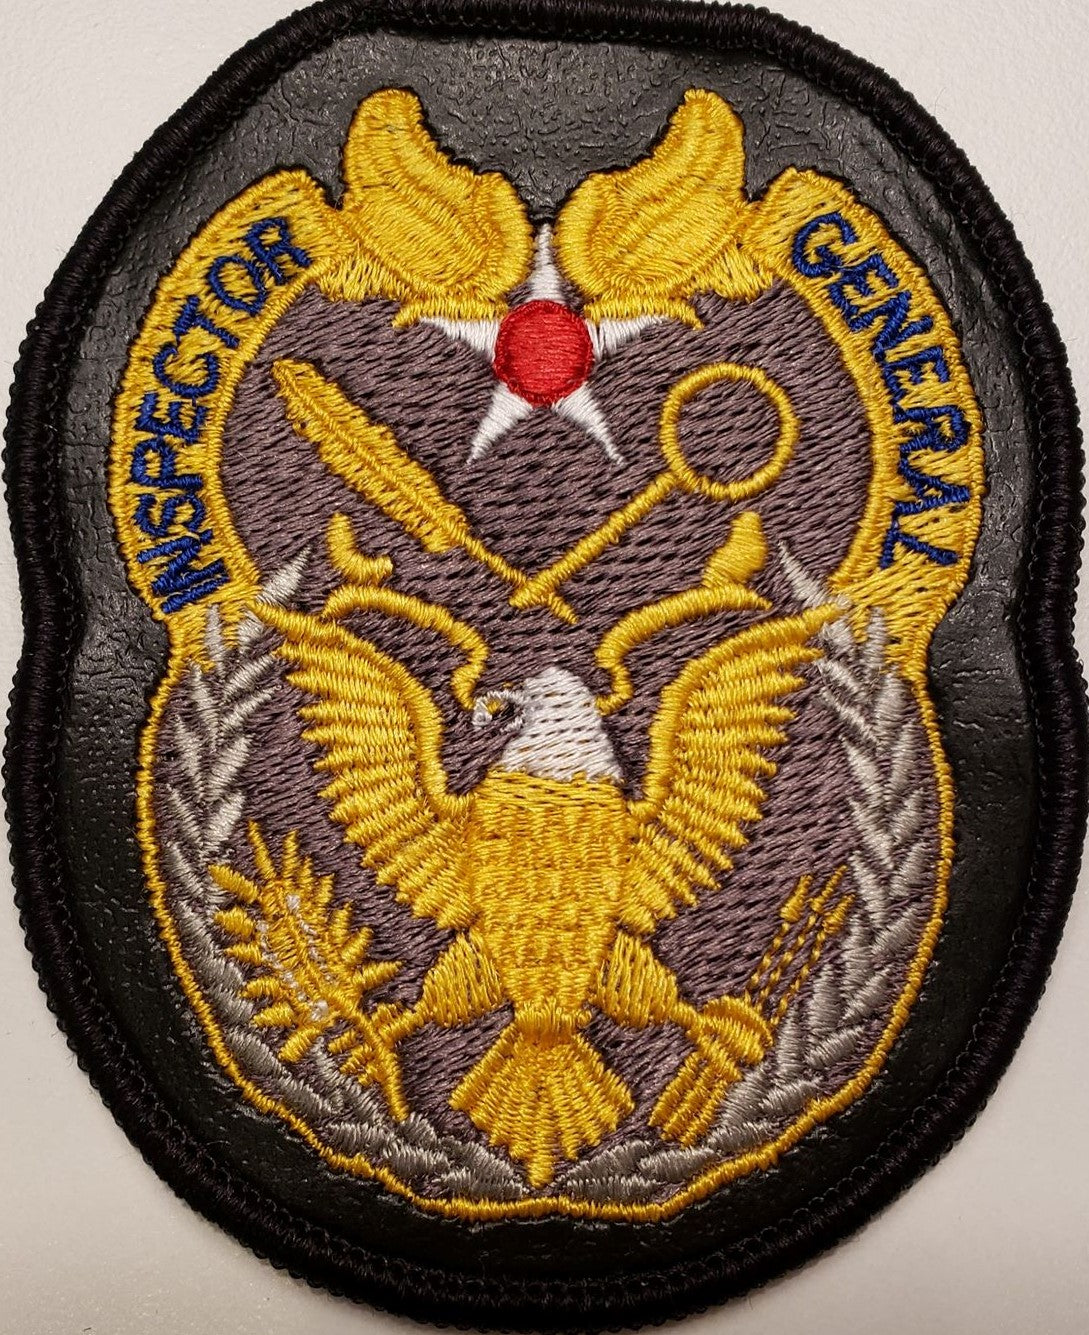 Inspector General Leather Patch - Reaper Patches